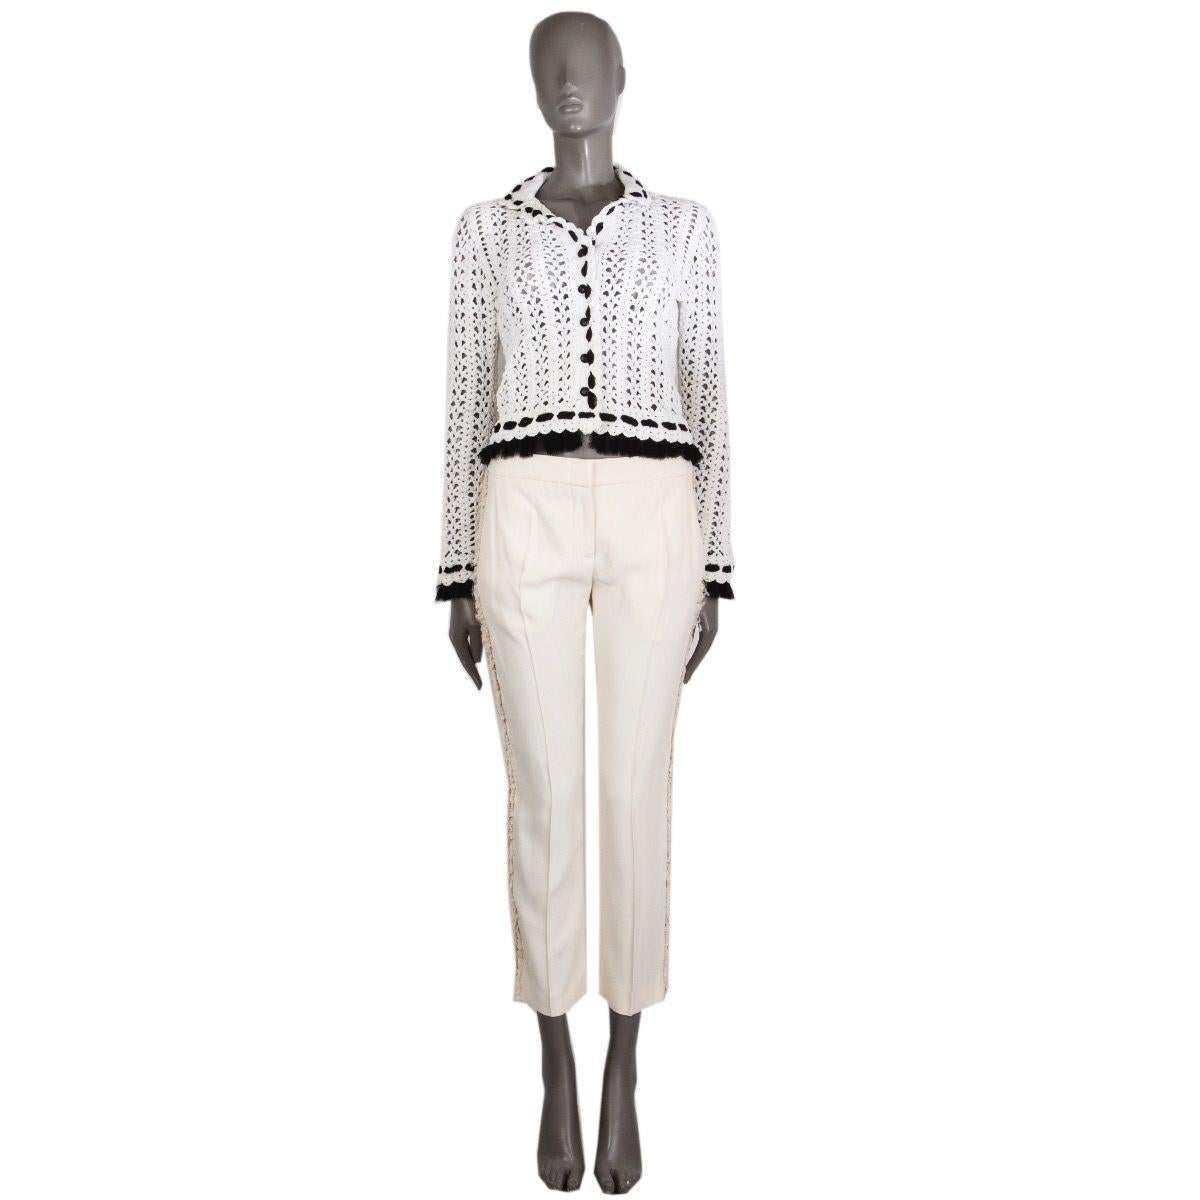 Chanel crochet jacket in off-white nylon (81%), cotton (18%), and spandex (1%) with looped trim and hemline in black silk organza (100%). Closes with small CC buttons in black plastic. Unlined. Has been worn and is in excellent condition. 

Tag Size